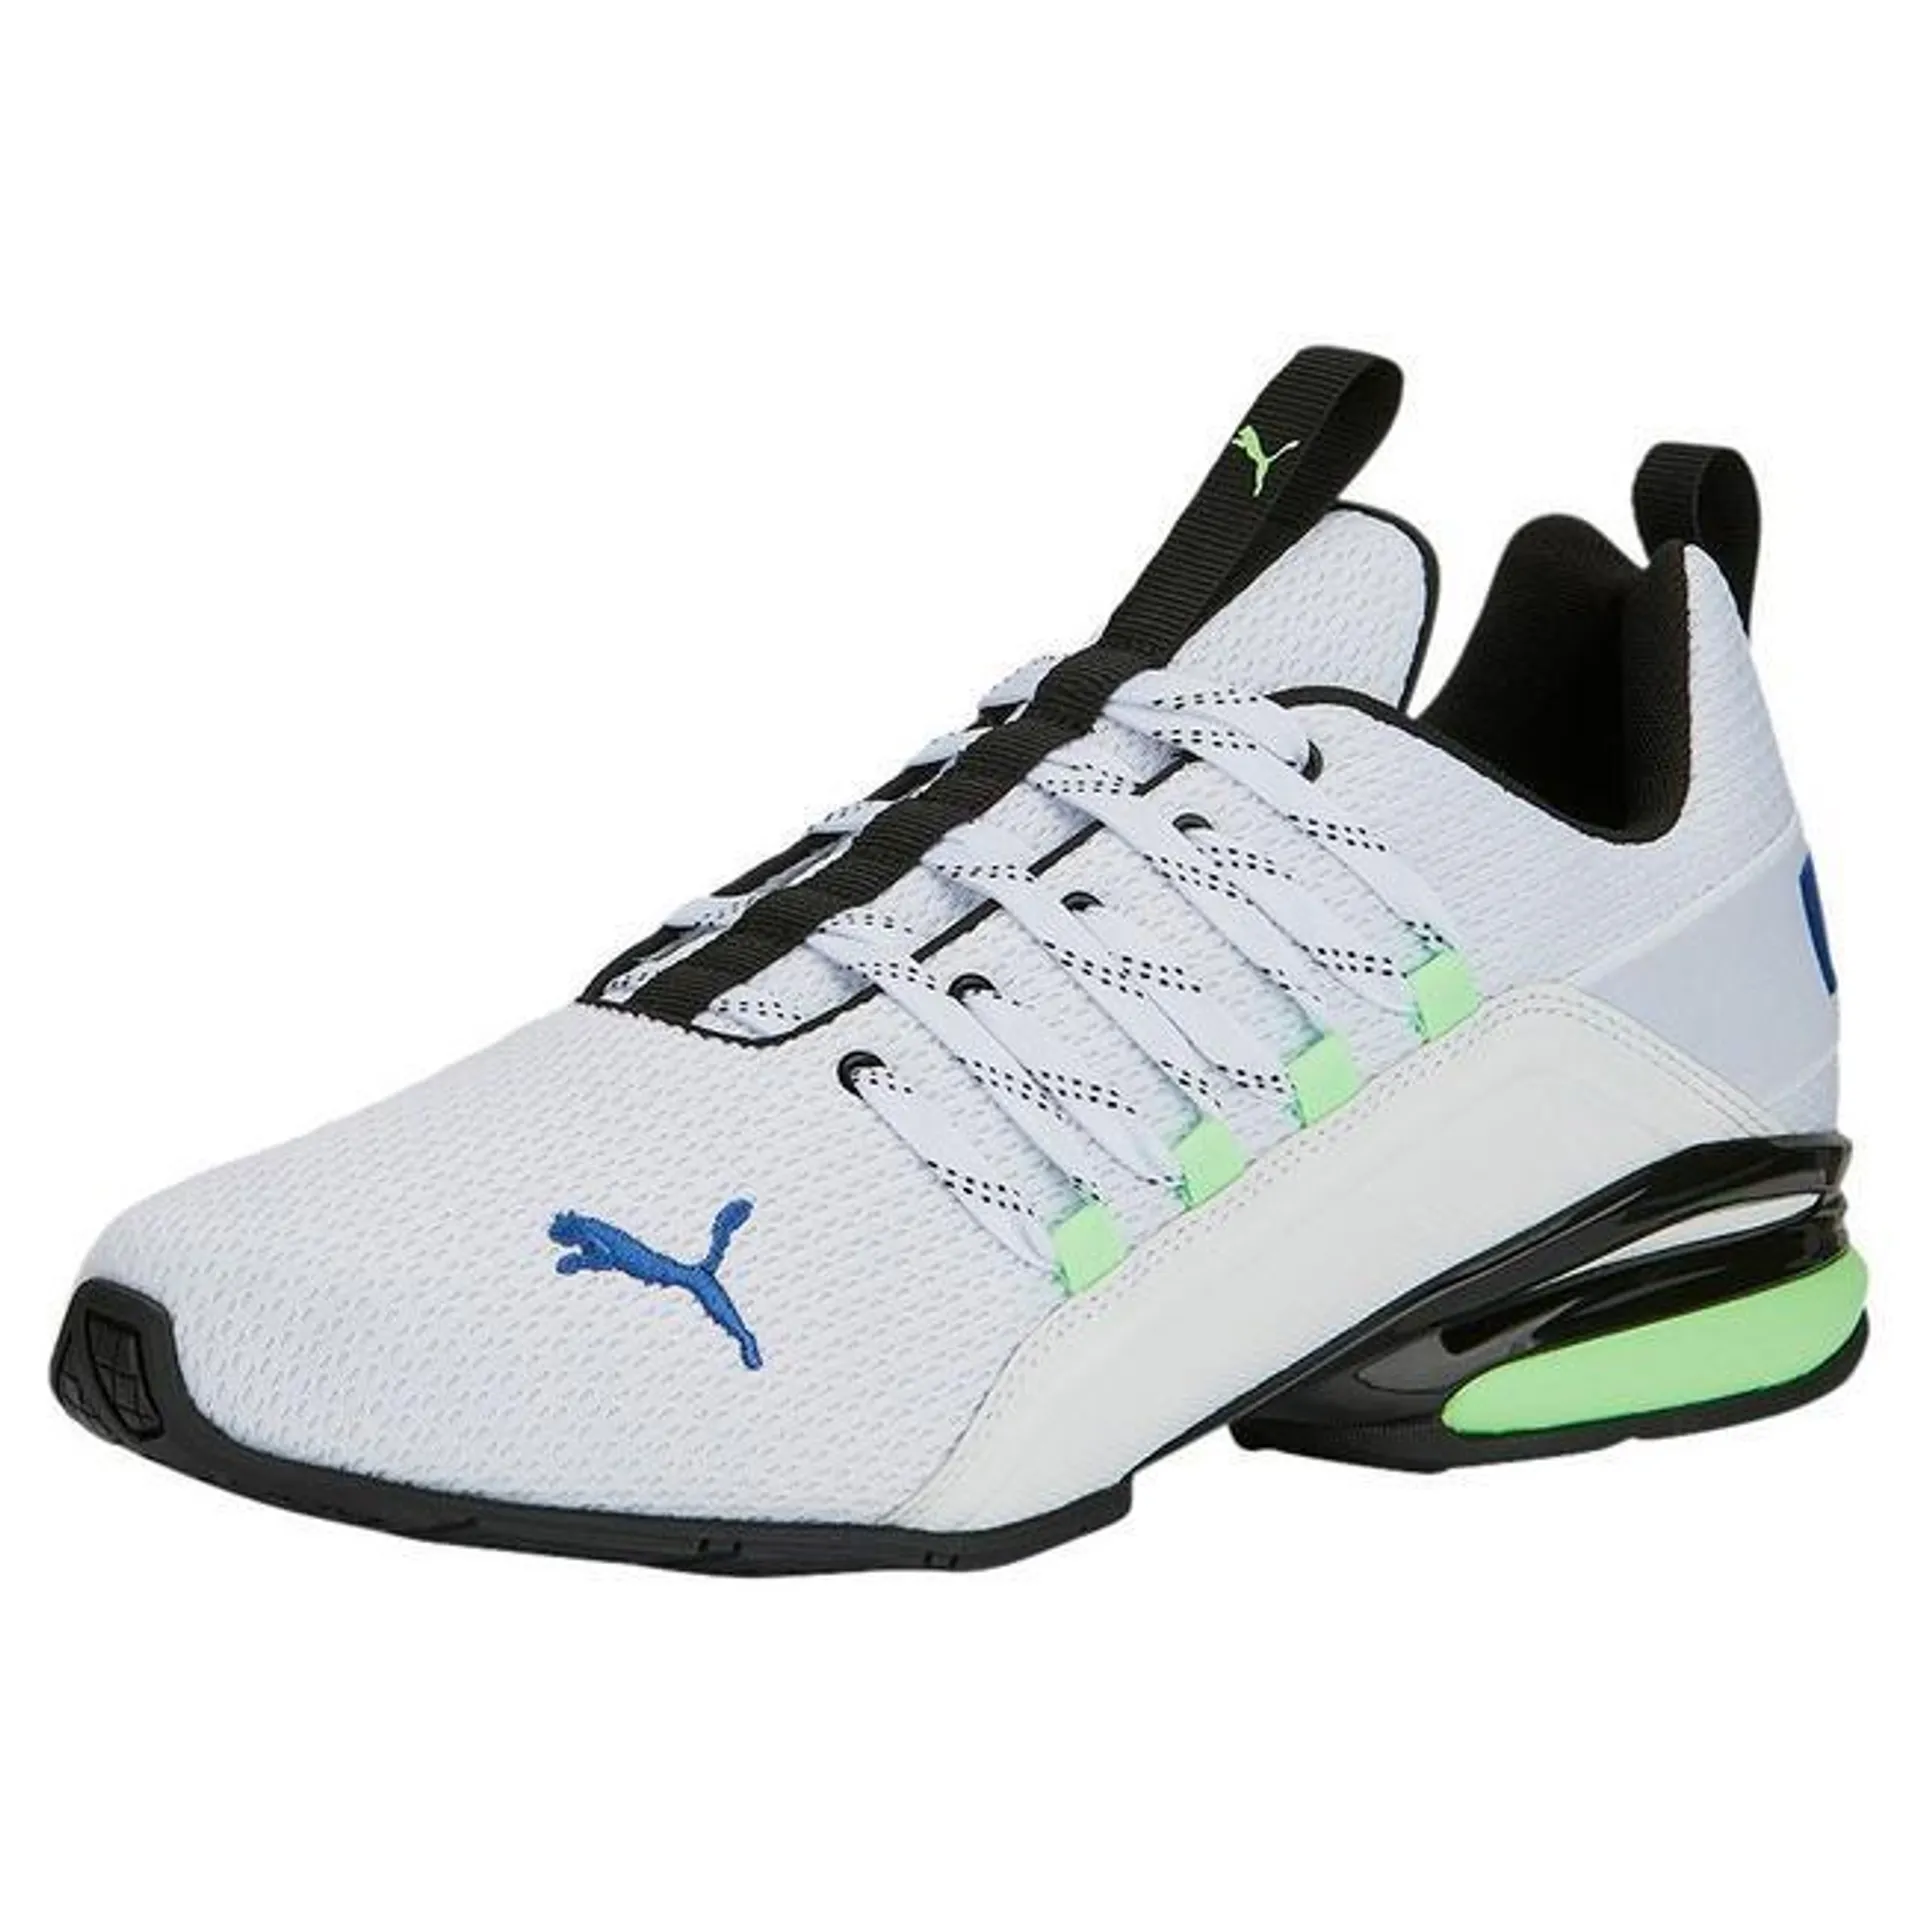 Mens Axelion Refresh Running Shoes